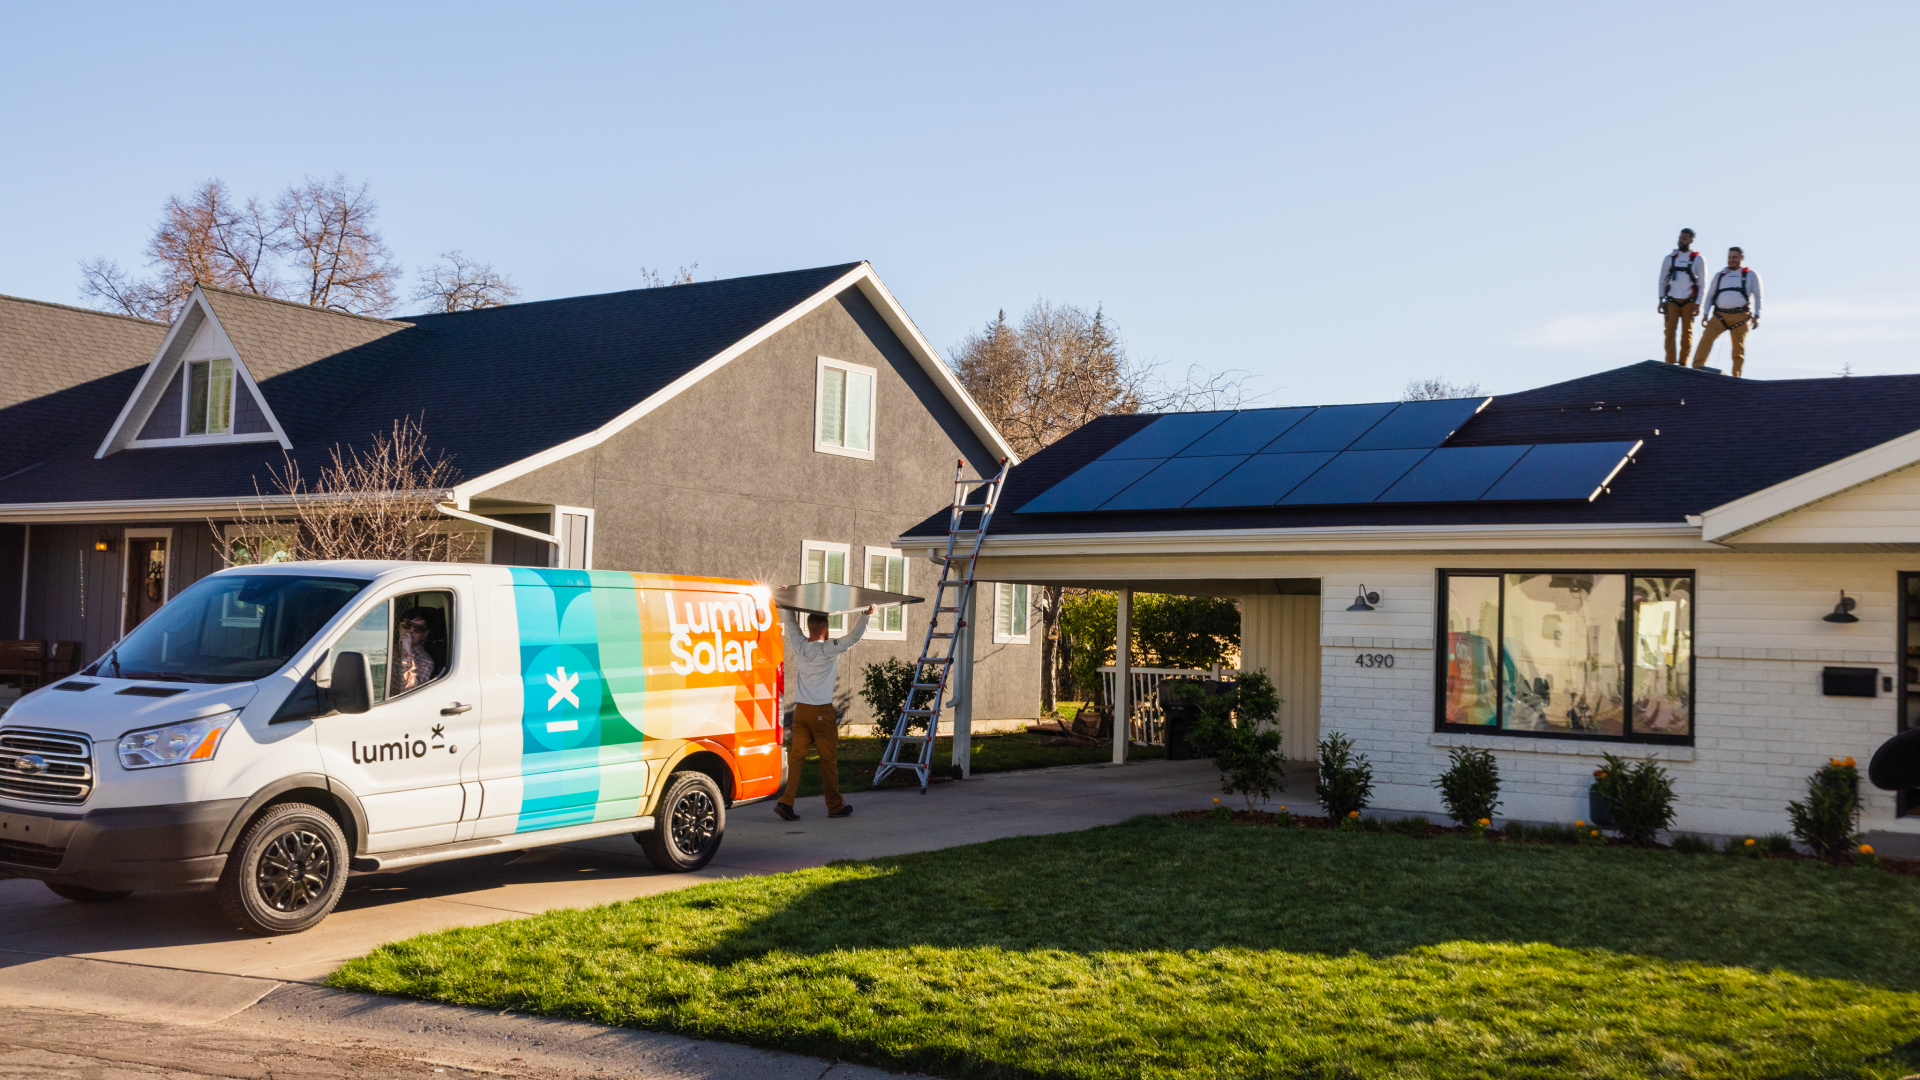 Lumio installers working on a solar panel installation on the roof of a house.